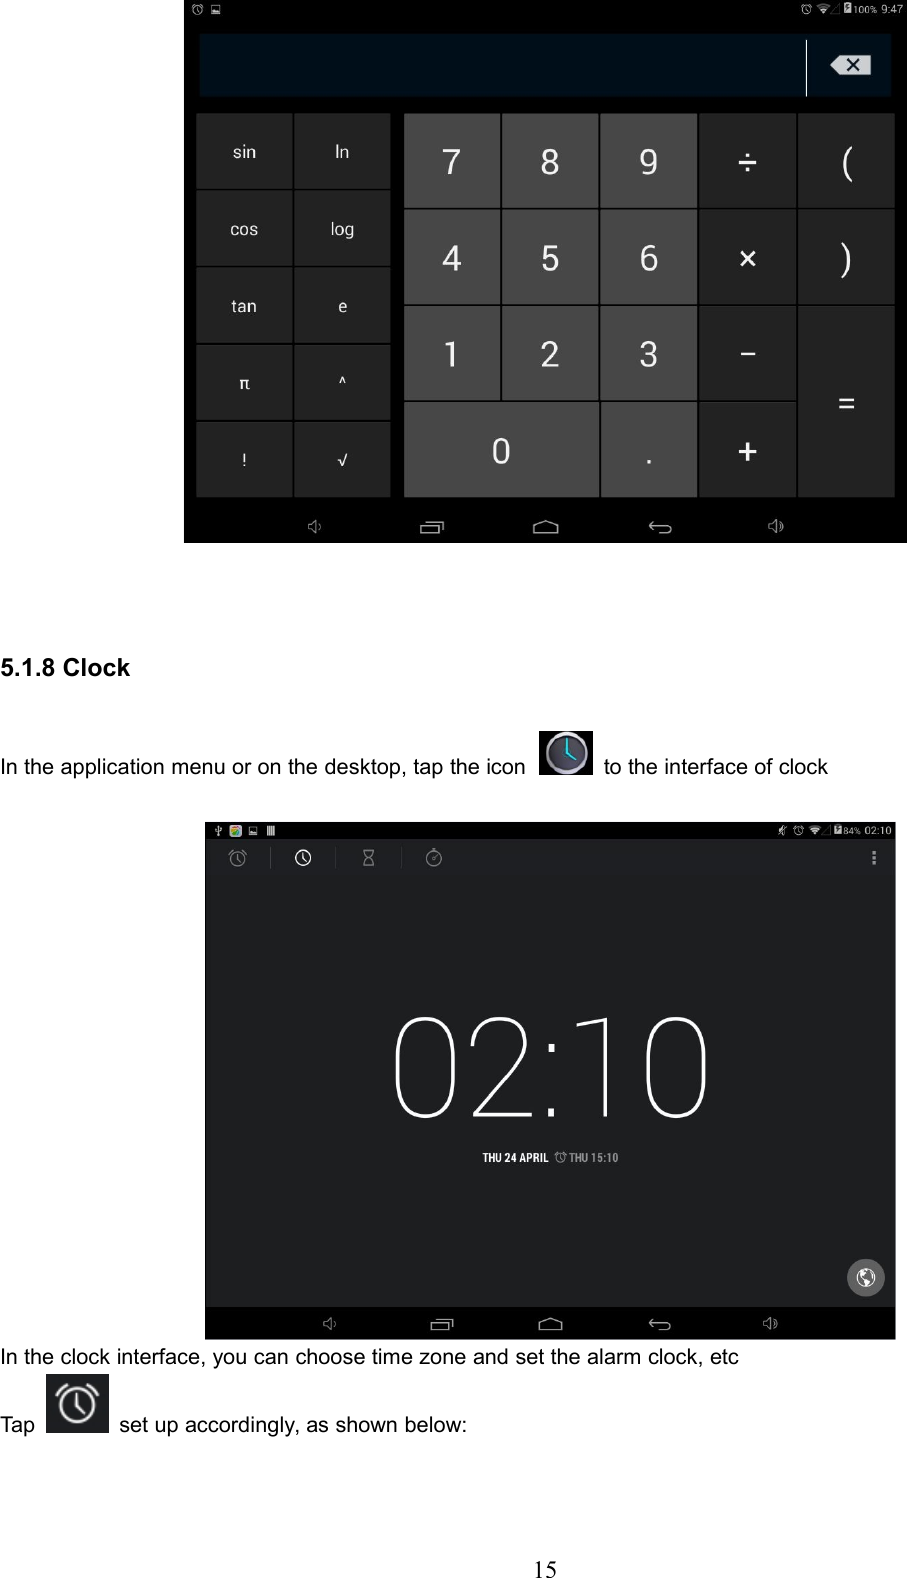 155.1.8 ClockIn the application menu or on the desktop, tap the icon to the interface of clockIn the clock interface, you can choose time zone and set the alarm clock, etcTap set up accordingly, as shown below: